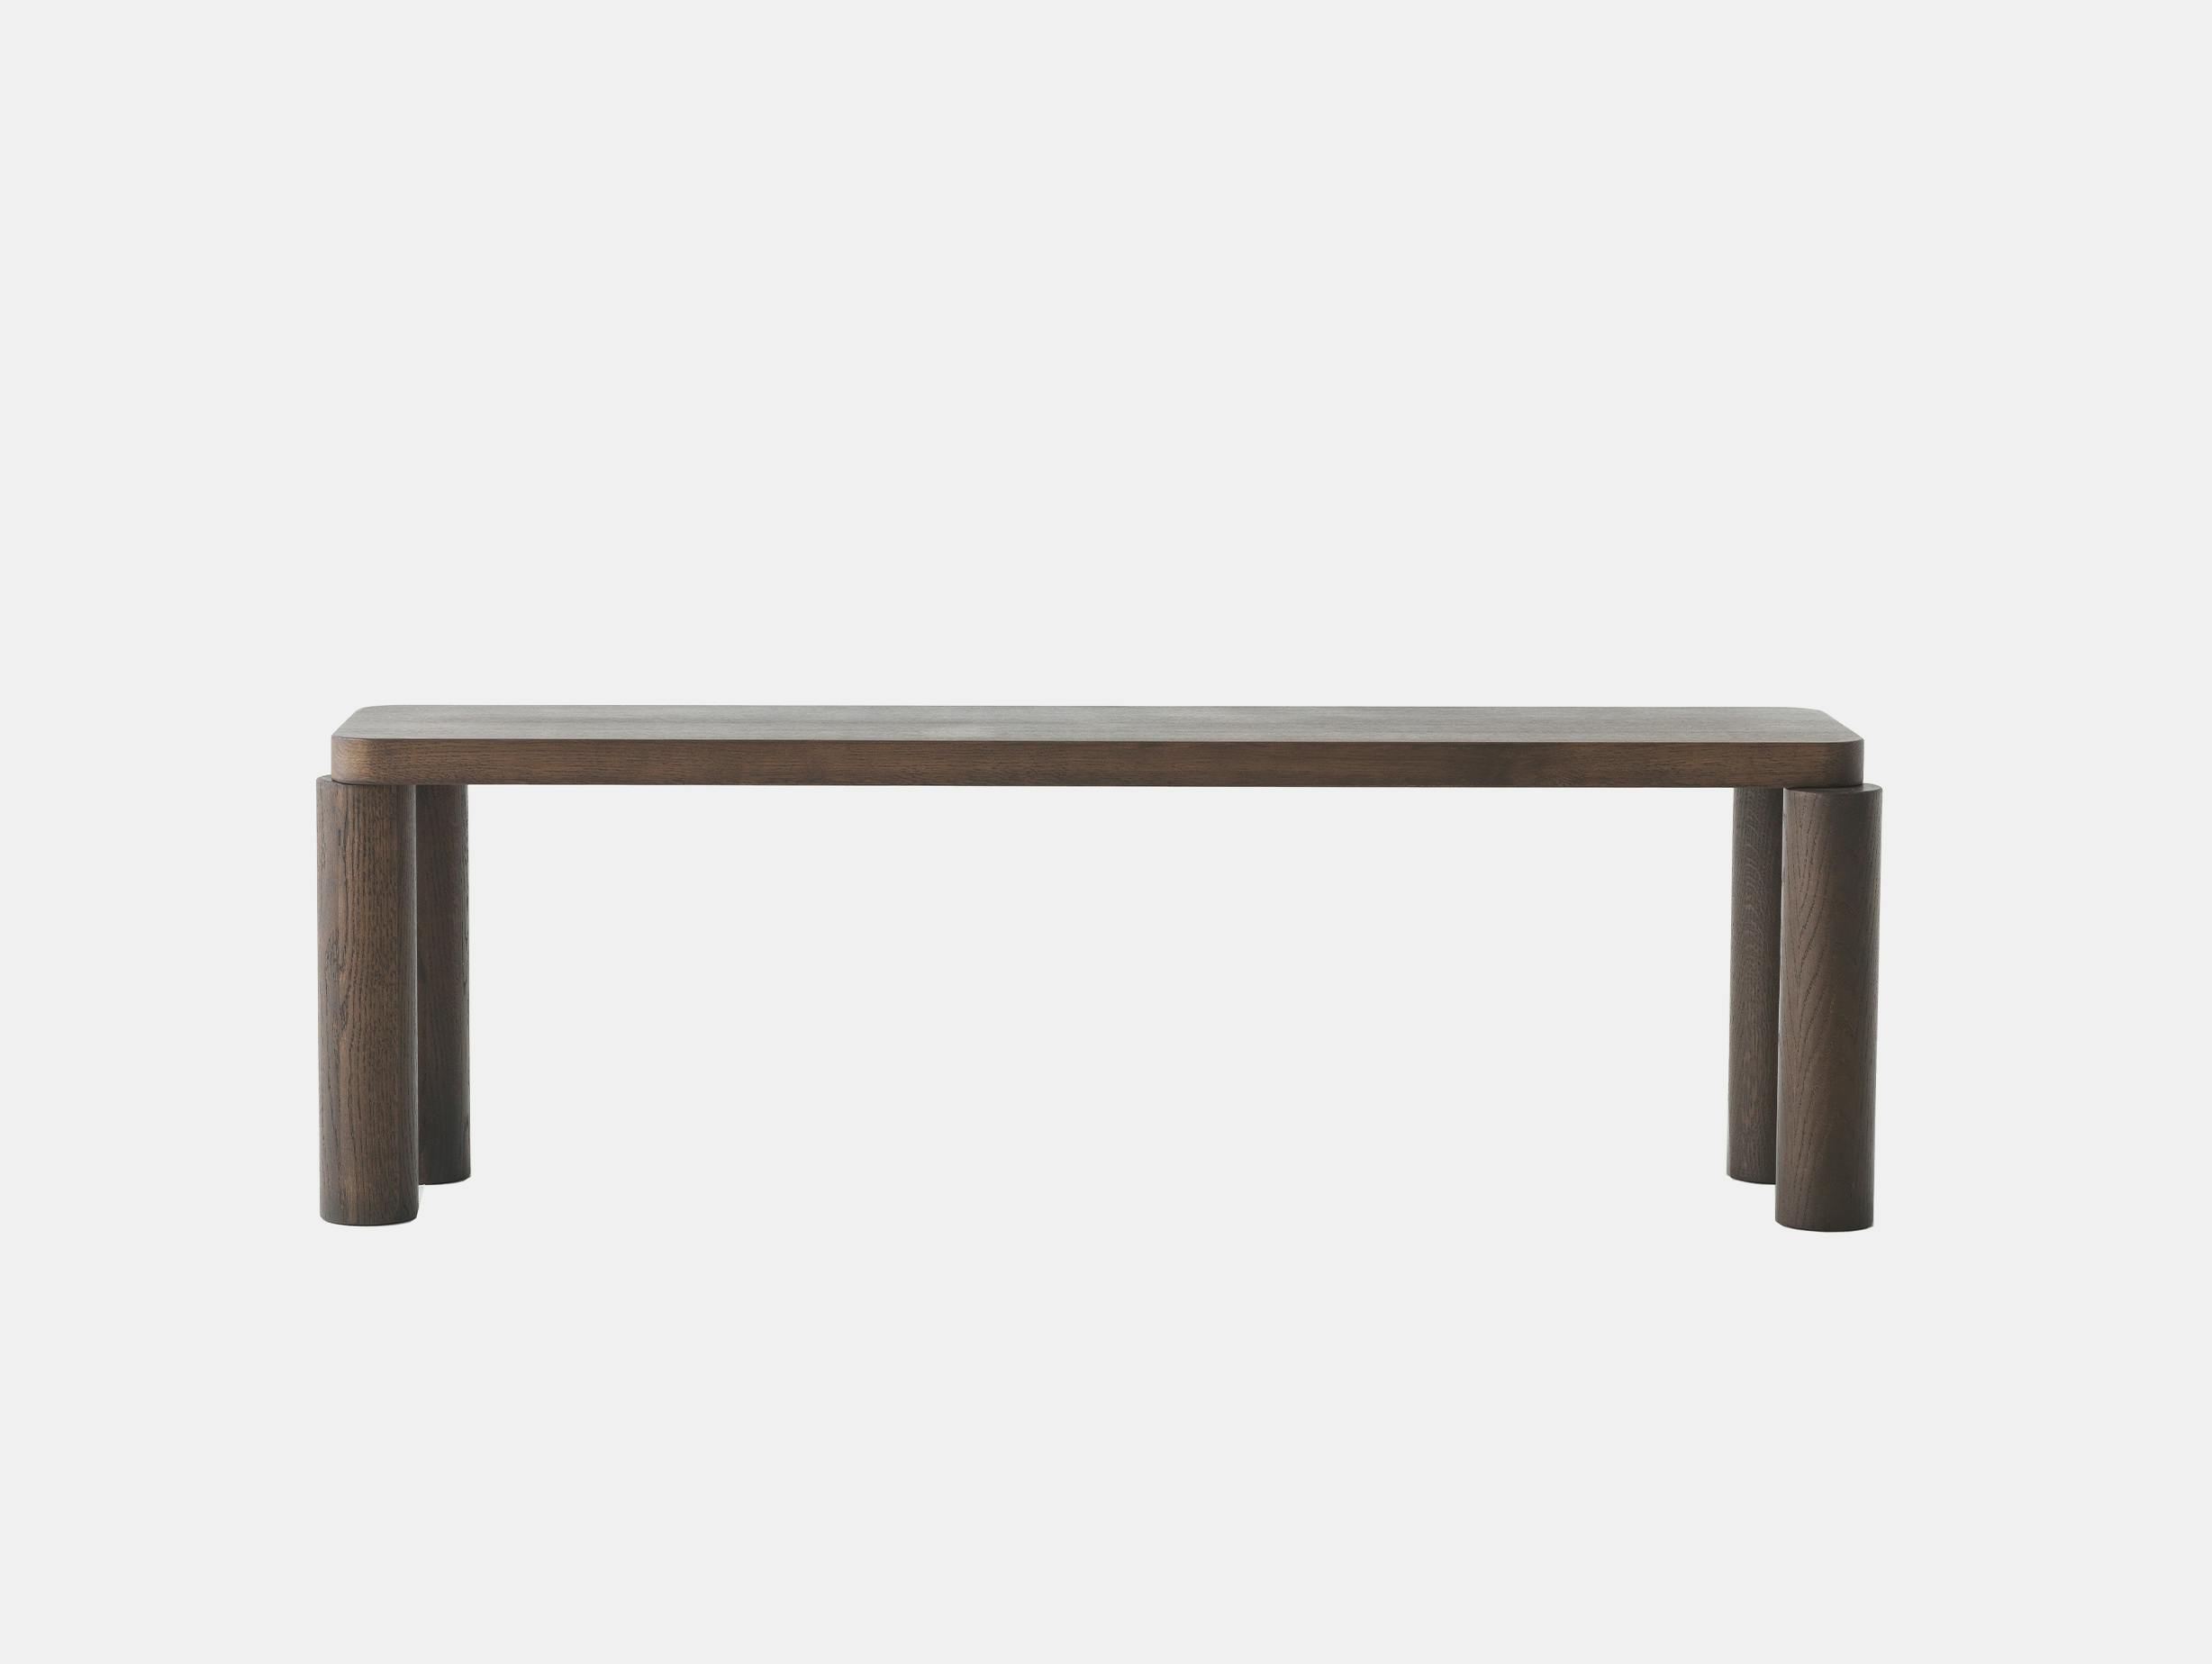 Resident philippe malouin offset bench stained umber